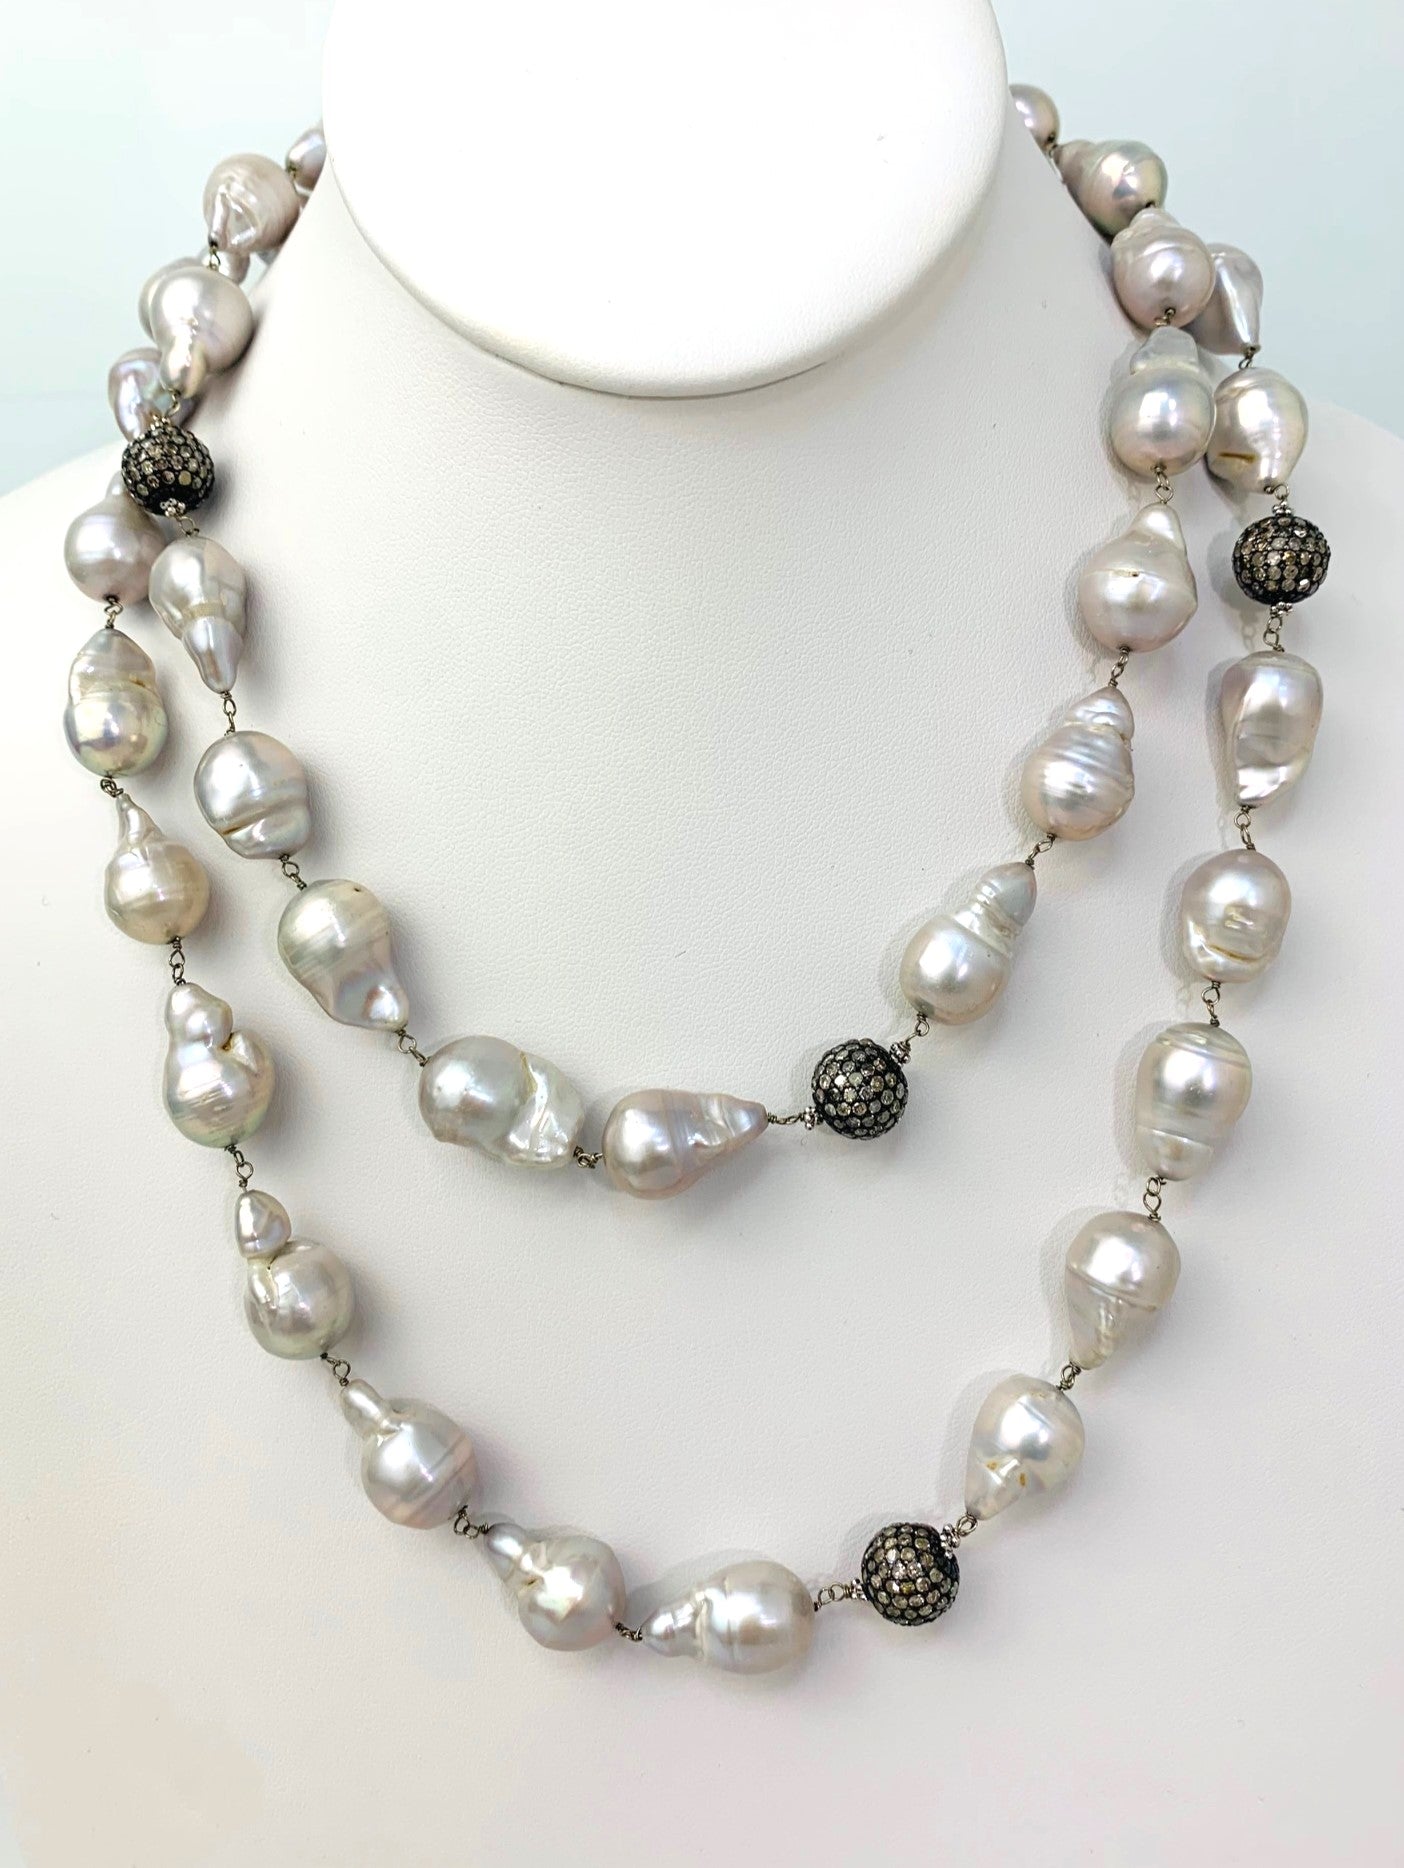 39" Freshwater Grey Baroque Pearl And Blackened Silver Pave Diamond Bead Rosary Necklace in 14KW, SS - NCK-392-DCOROSDIAPRL14WSS-GRY-39 7.2ctw